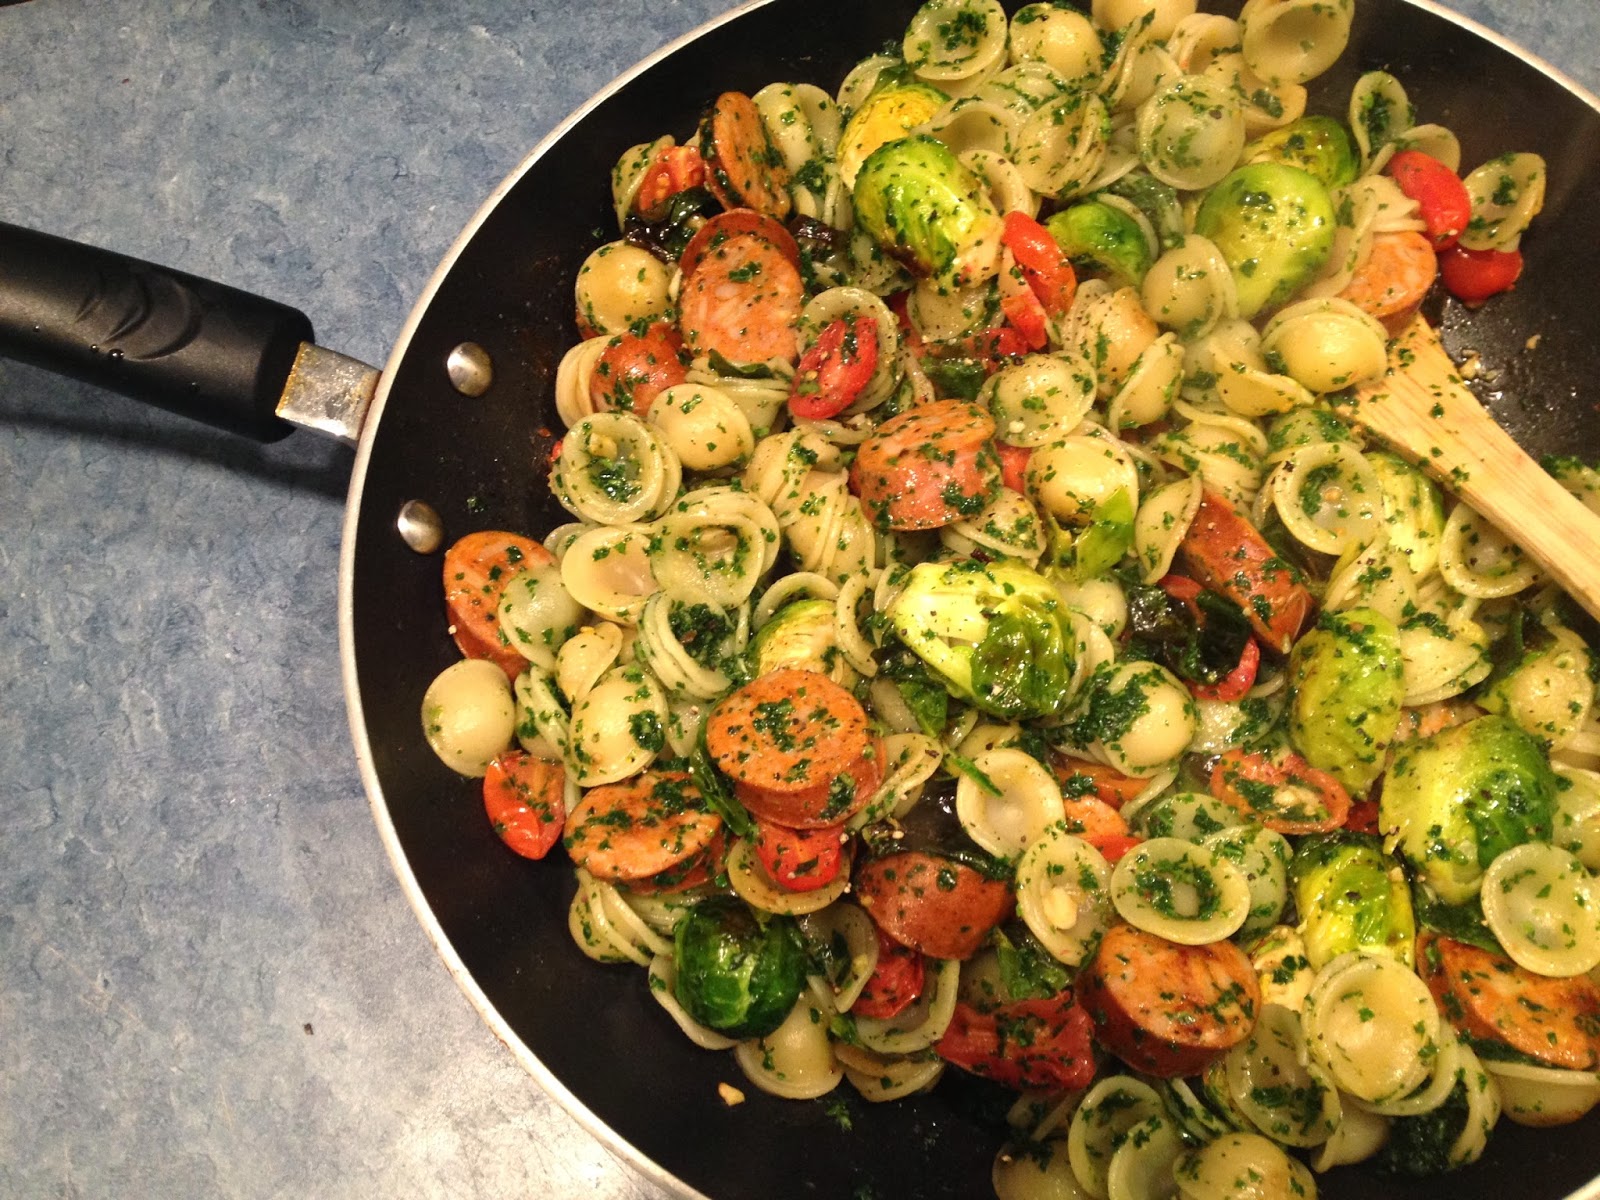 Pesto Orecchiette with Roasted Brussel Sprouts and Chicken Sausage